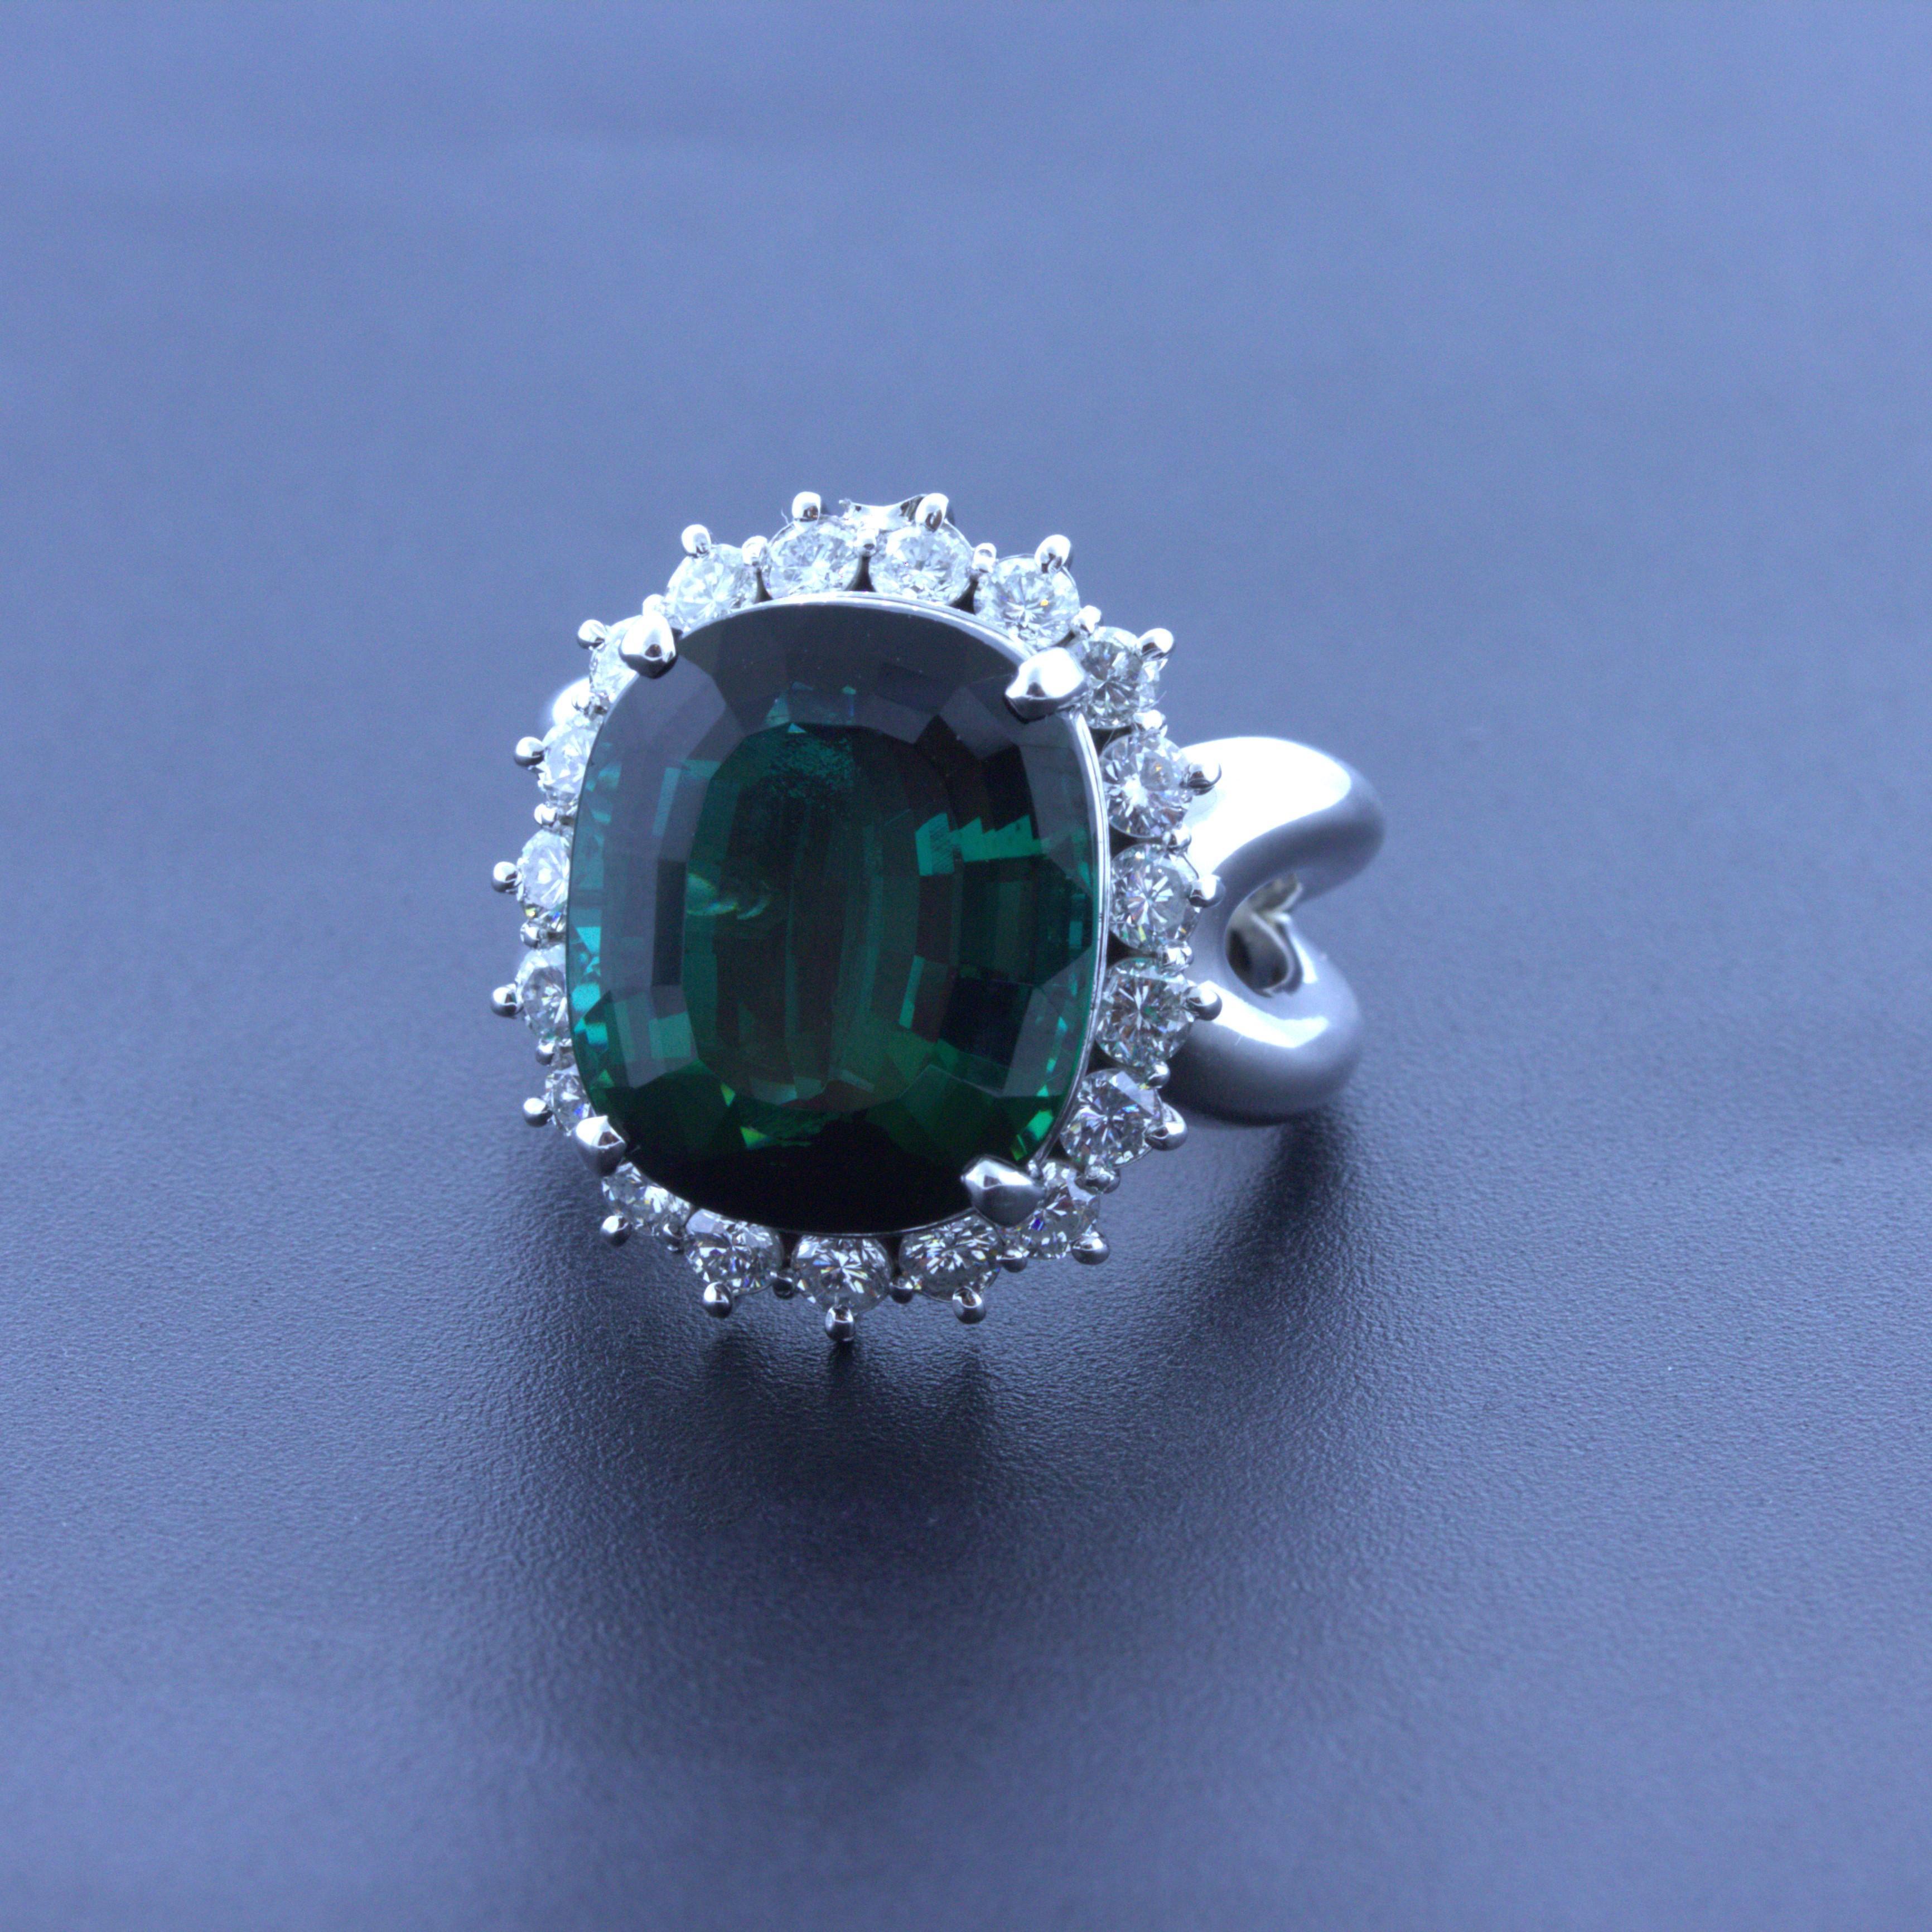 A classic diamond halo gemstone ring featuring a very fine green tourmaline. It weighs a substantial 11.10 carats and has a rich velvety green color with a hint of blue. The color reminds us of indicolite tourmaline if green was a color variety of